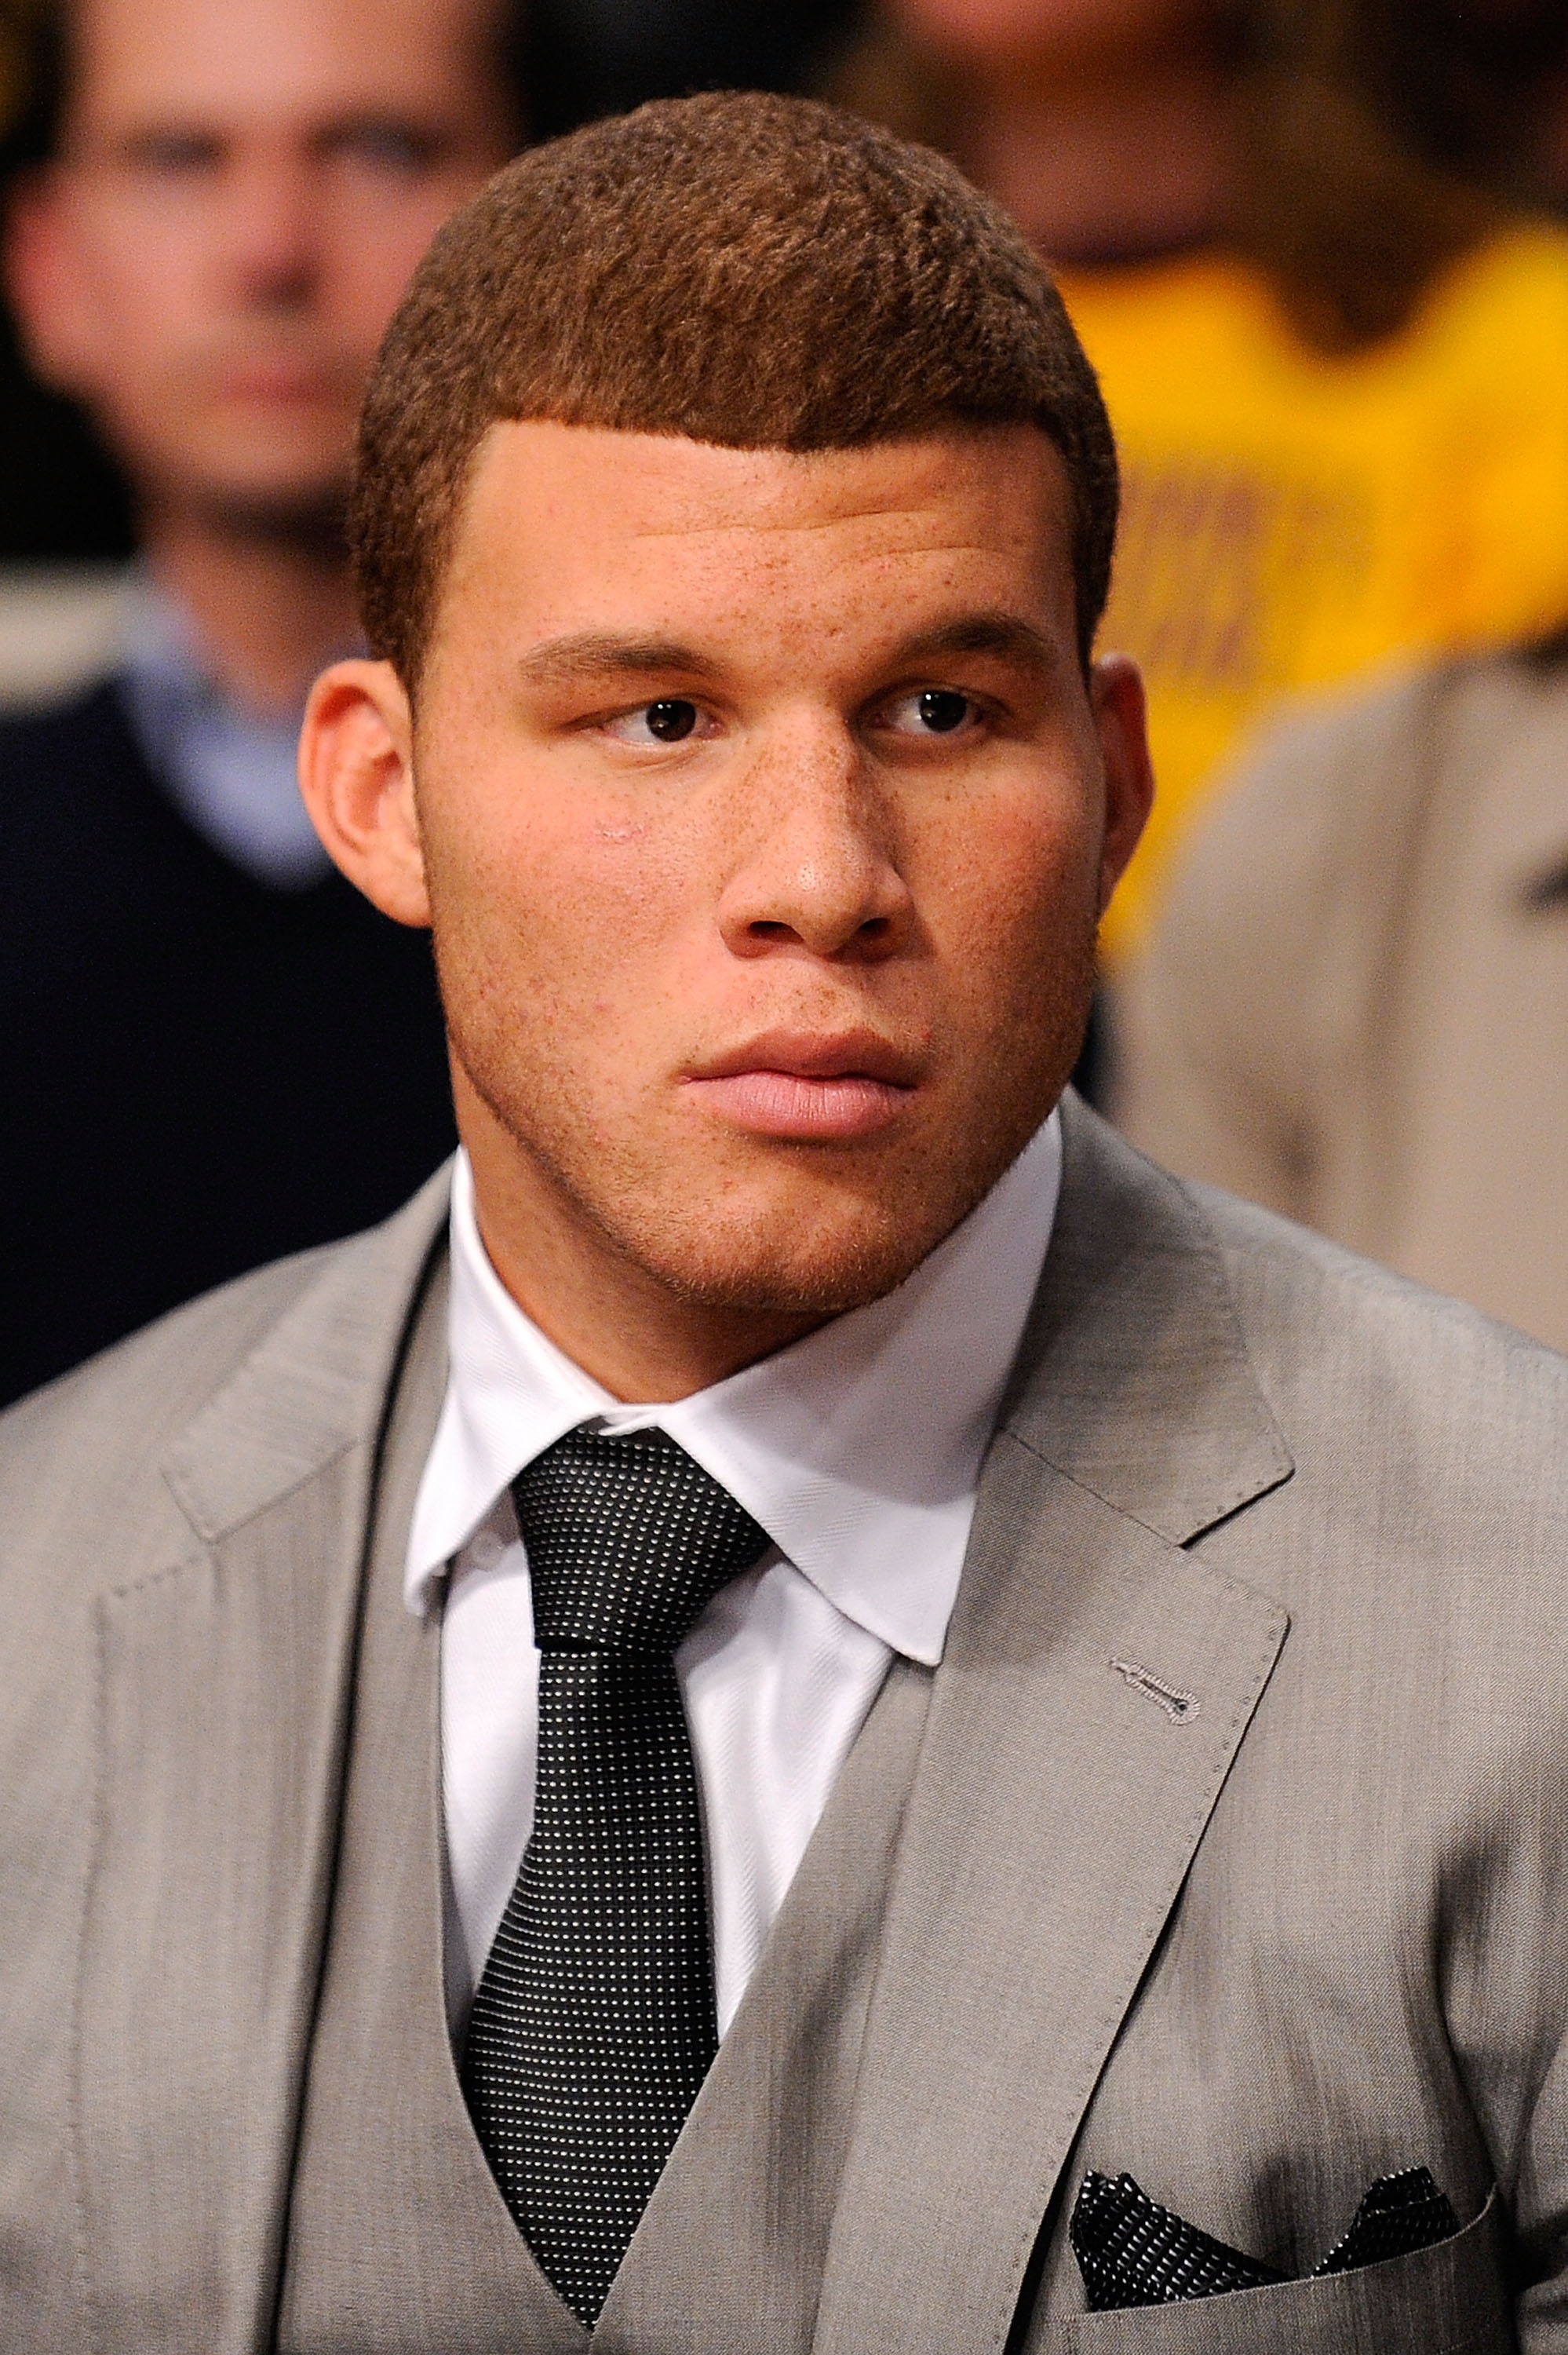 LOS ANGELES, CA - OCTOBER 27:  Blake Griffin #32 of the Los Angeles Clippers watches the season opening game against the Los Angeles Lakers at Staples Center on October 27, 2009 in Los Angeles, California.  NOTE TO USER: User expressly acknowledges and ag